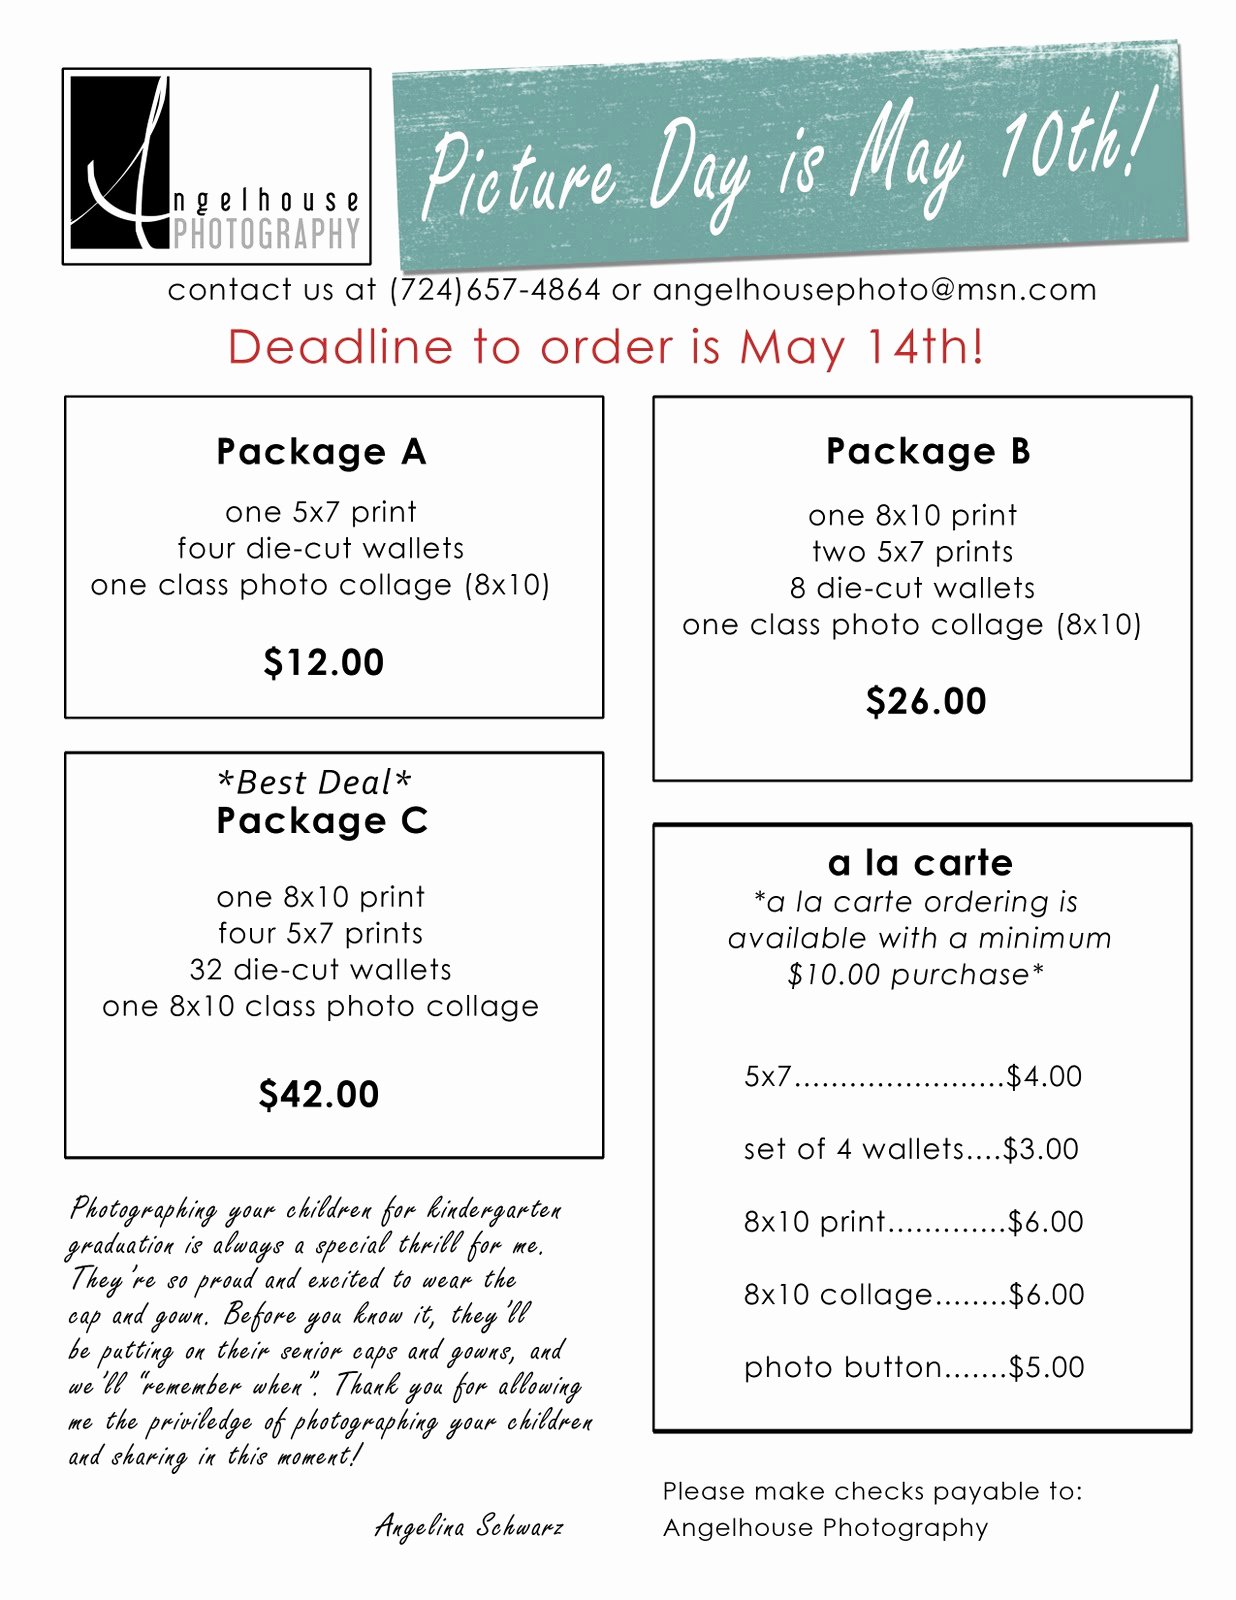 Free Photography Price List Template New Angelhouse Photography April 2010